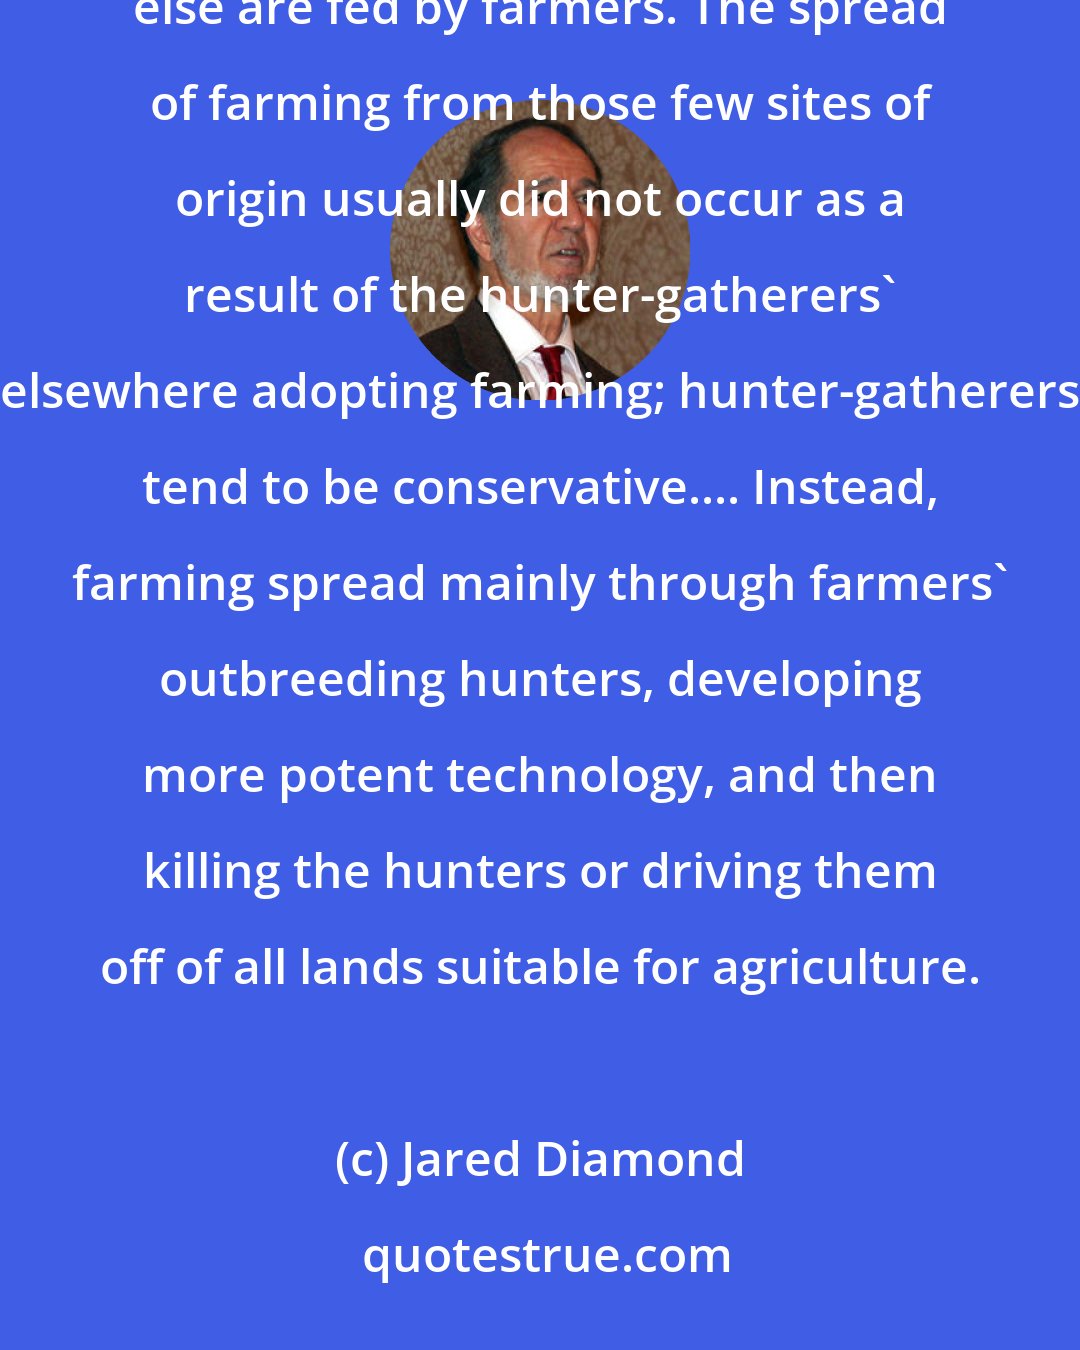 Jared Diamond: Twelve thousand years ago, everybody on earth was a hunter-gatherer; now almost all of us are farmers or else are fed by farmers. The spread of farming from those few sites of origin usually did not occur as a result of the hunter-gatherers' elsewhere adopting farming; hunter-gatherers tend to be conservative.... Instead, farming spread mainly through farmers' outbreeding hunters, developing more potent technology, and then killing the hunters or driving them off of all lands suitable for agriculture.